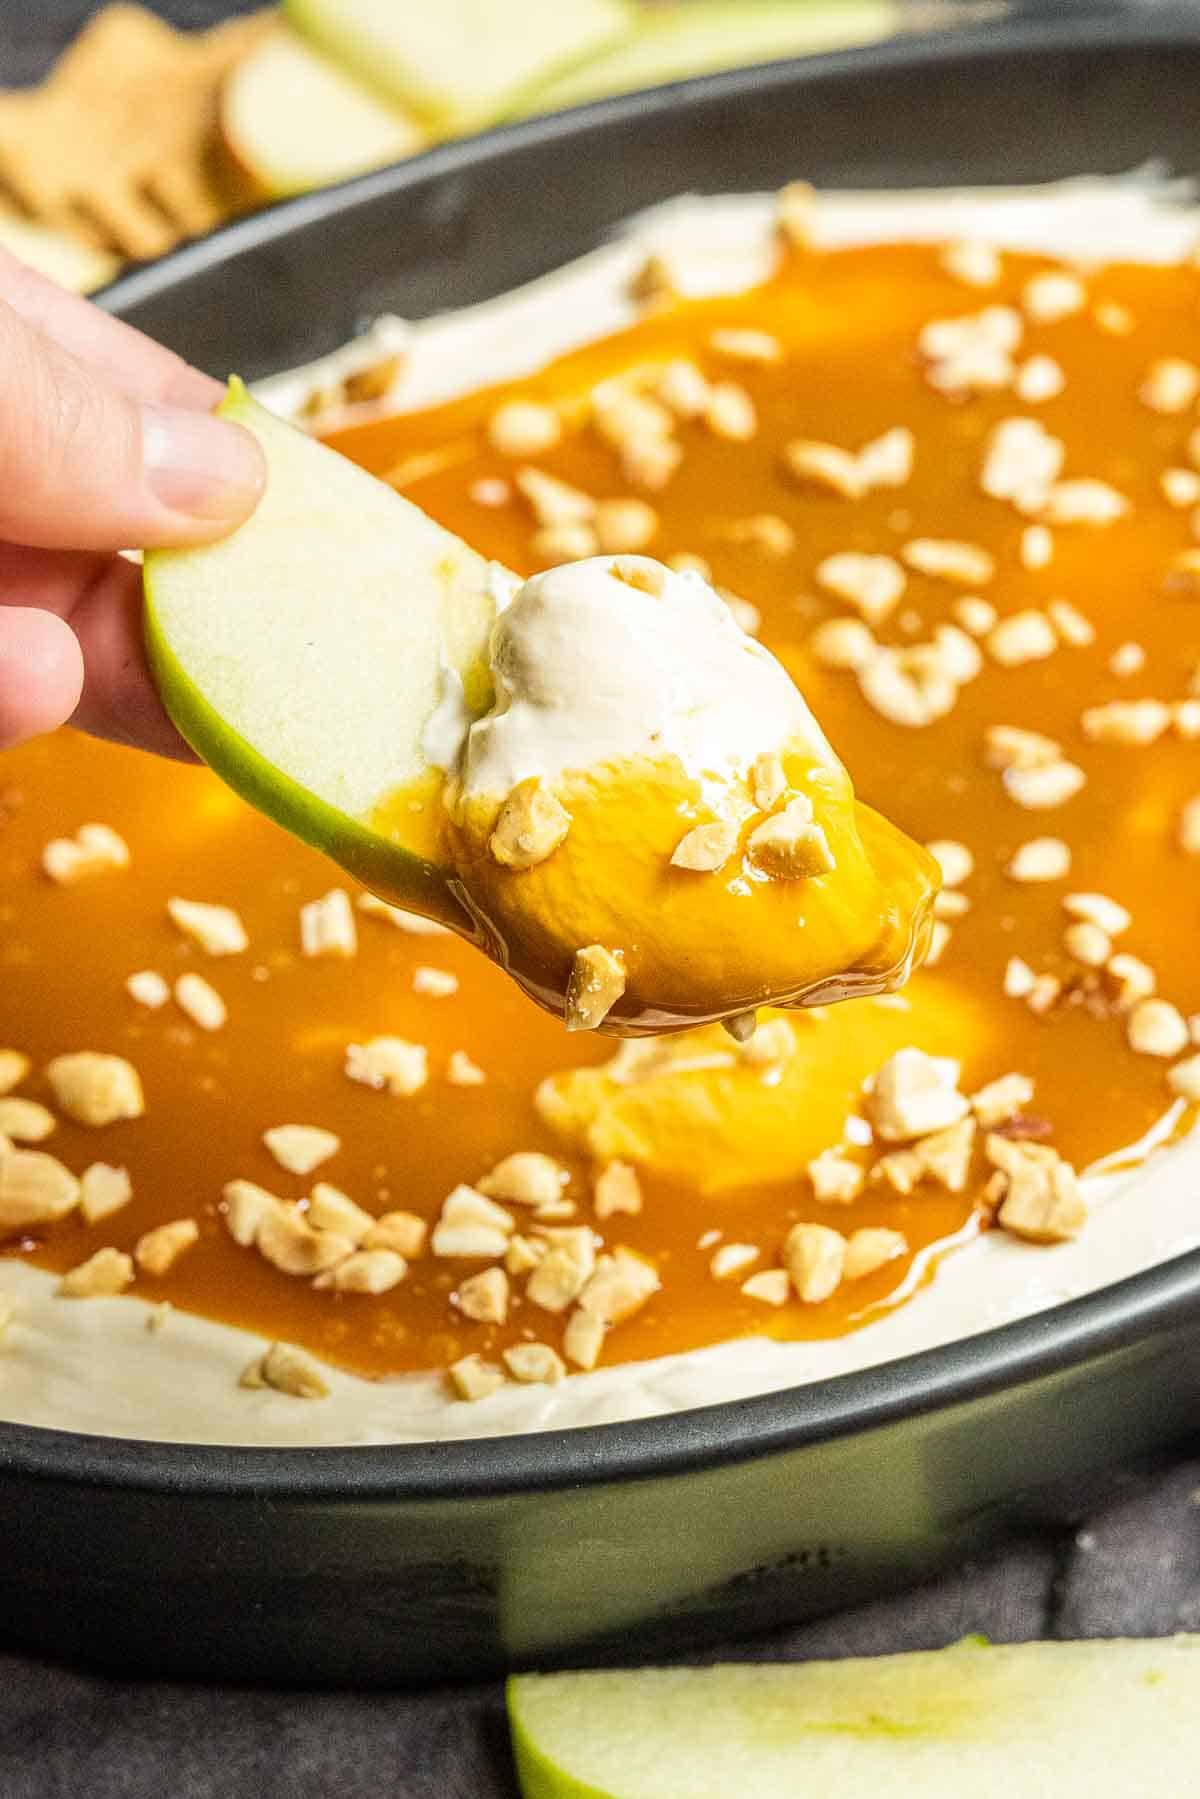 Caramel Apple Dip topped with chopped nuts